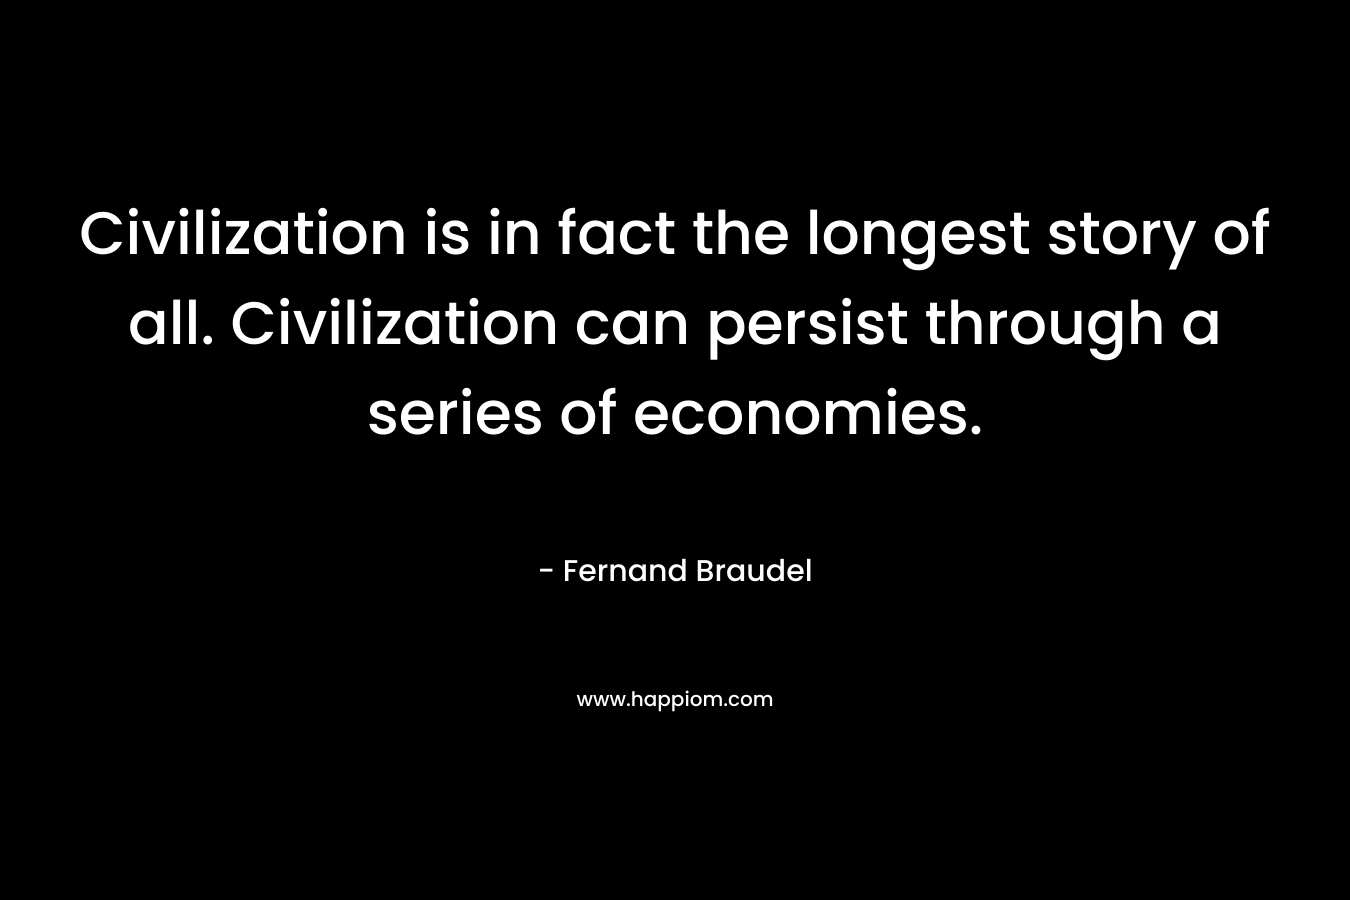 Civilization is in fact the longest story of all. Civilization can persist through a series of economies. – Fernand Braudel